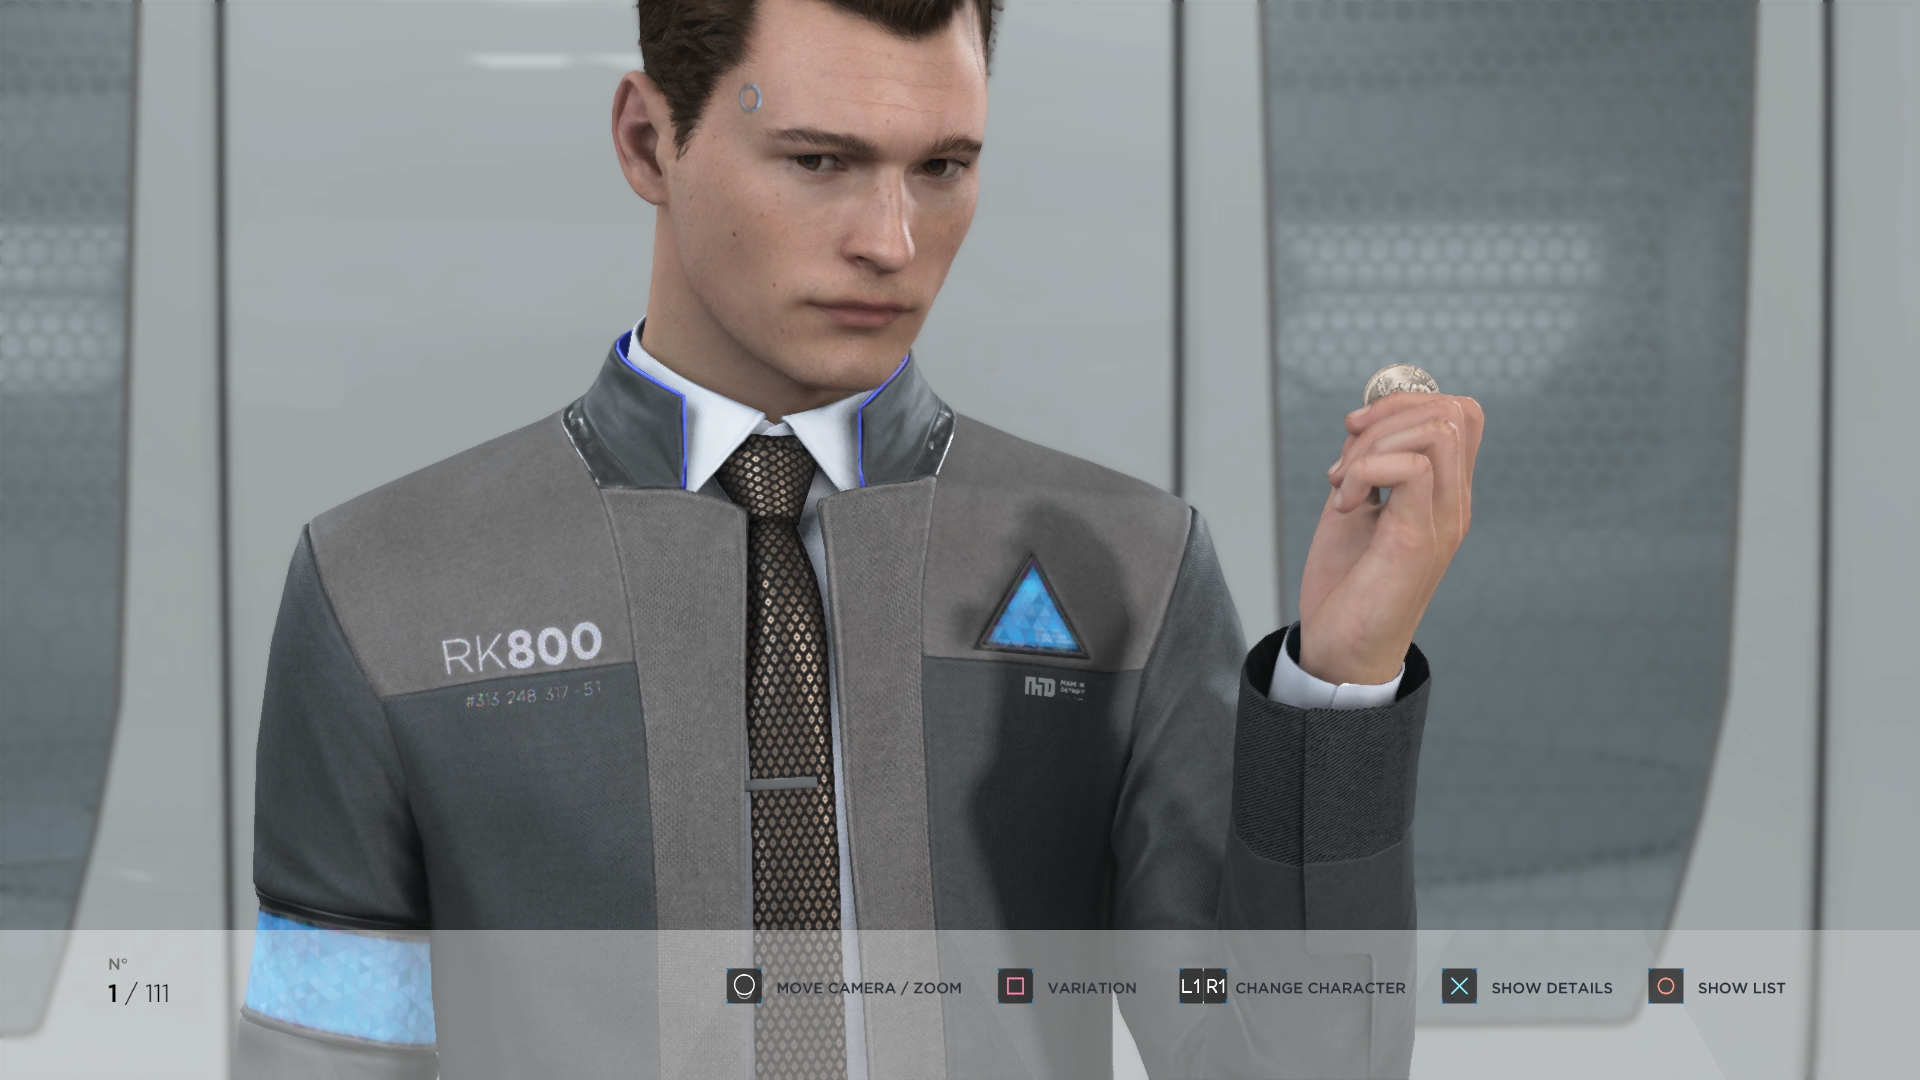 Respect Connor! (Detroit: Become Human) : r/respectthreads